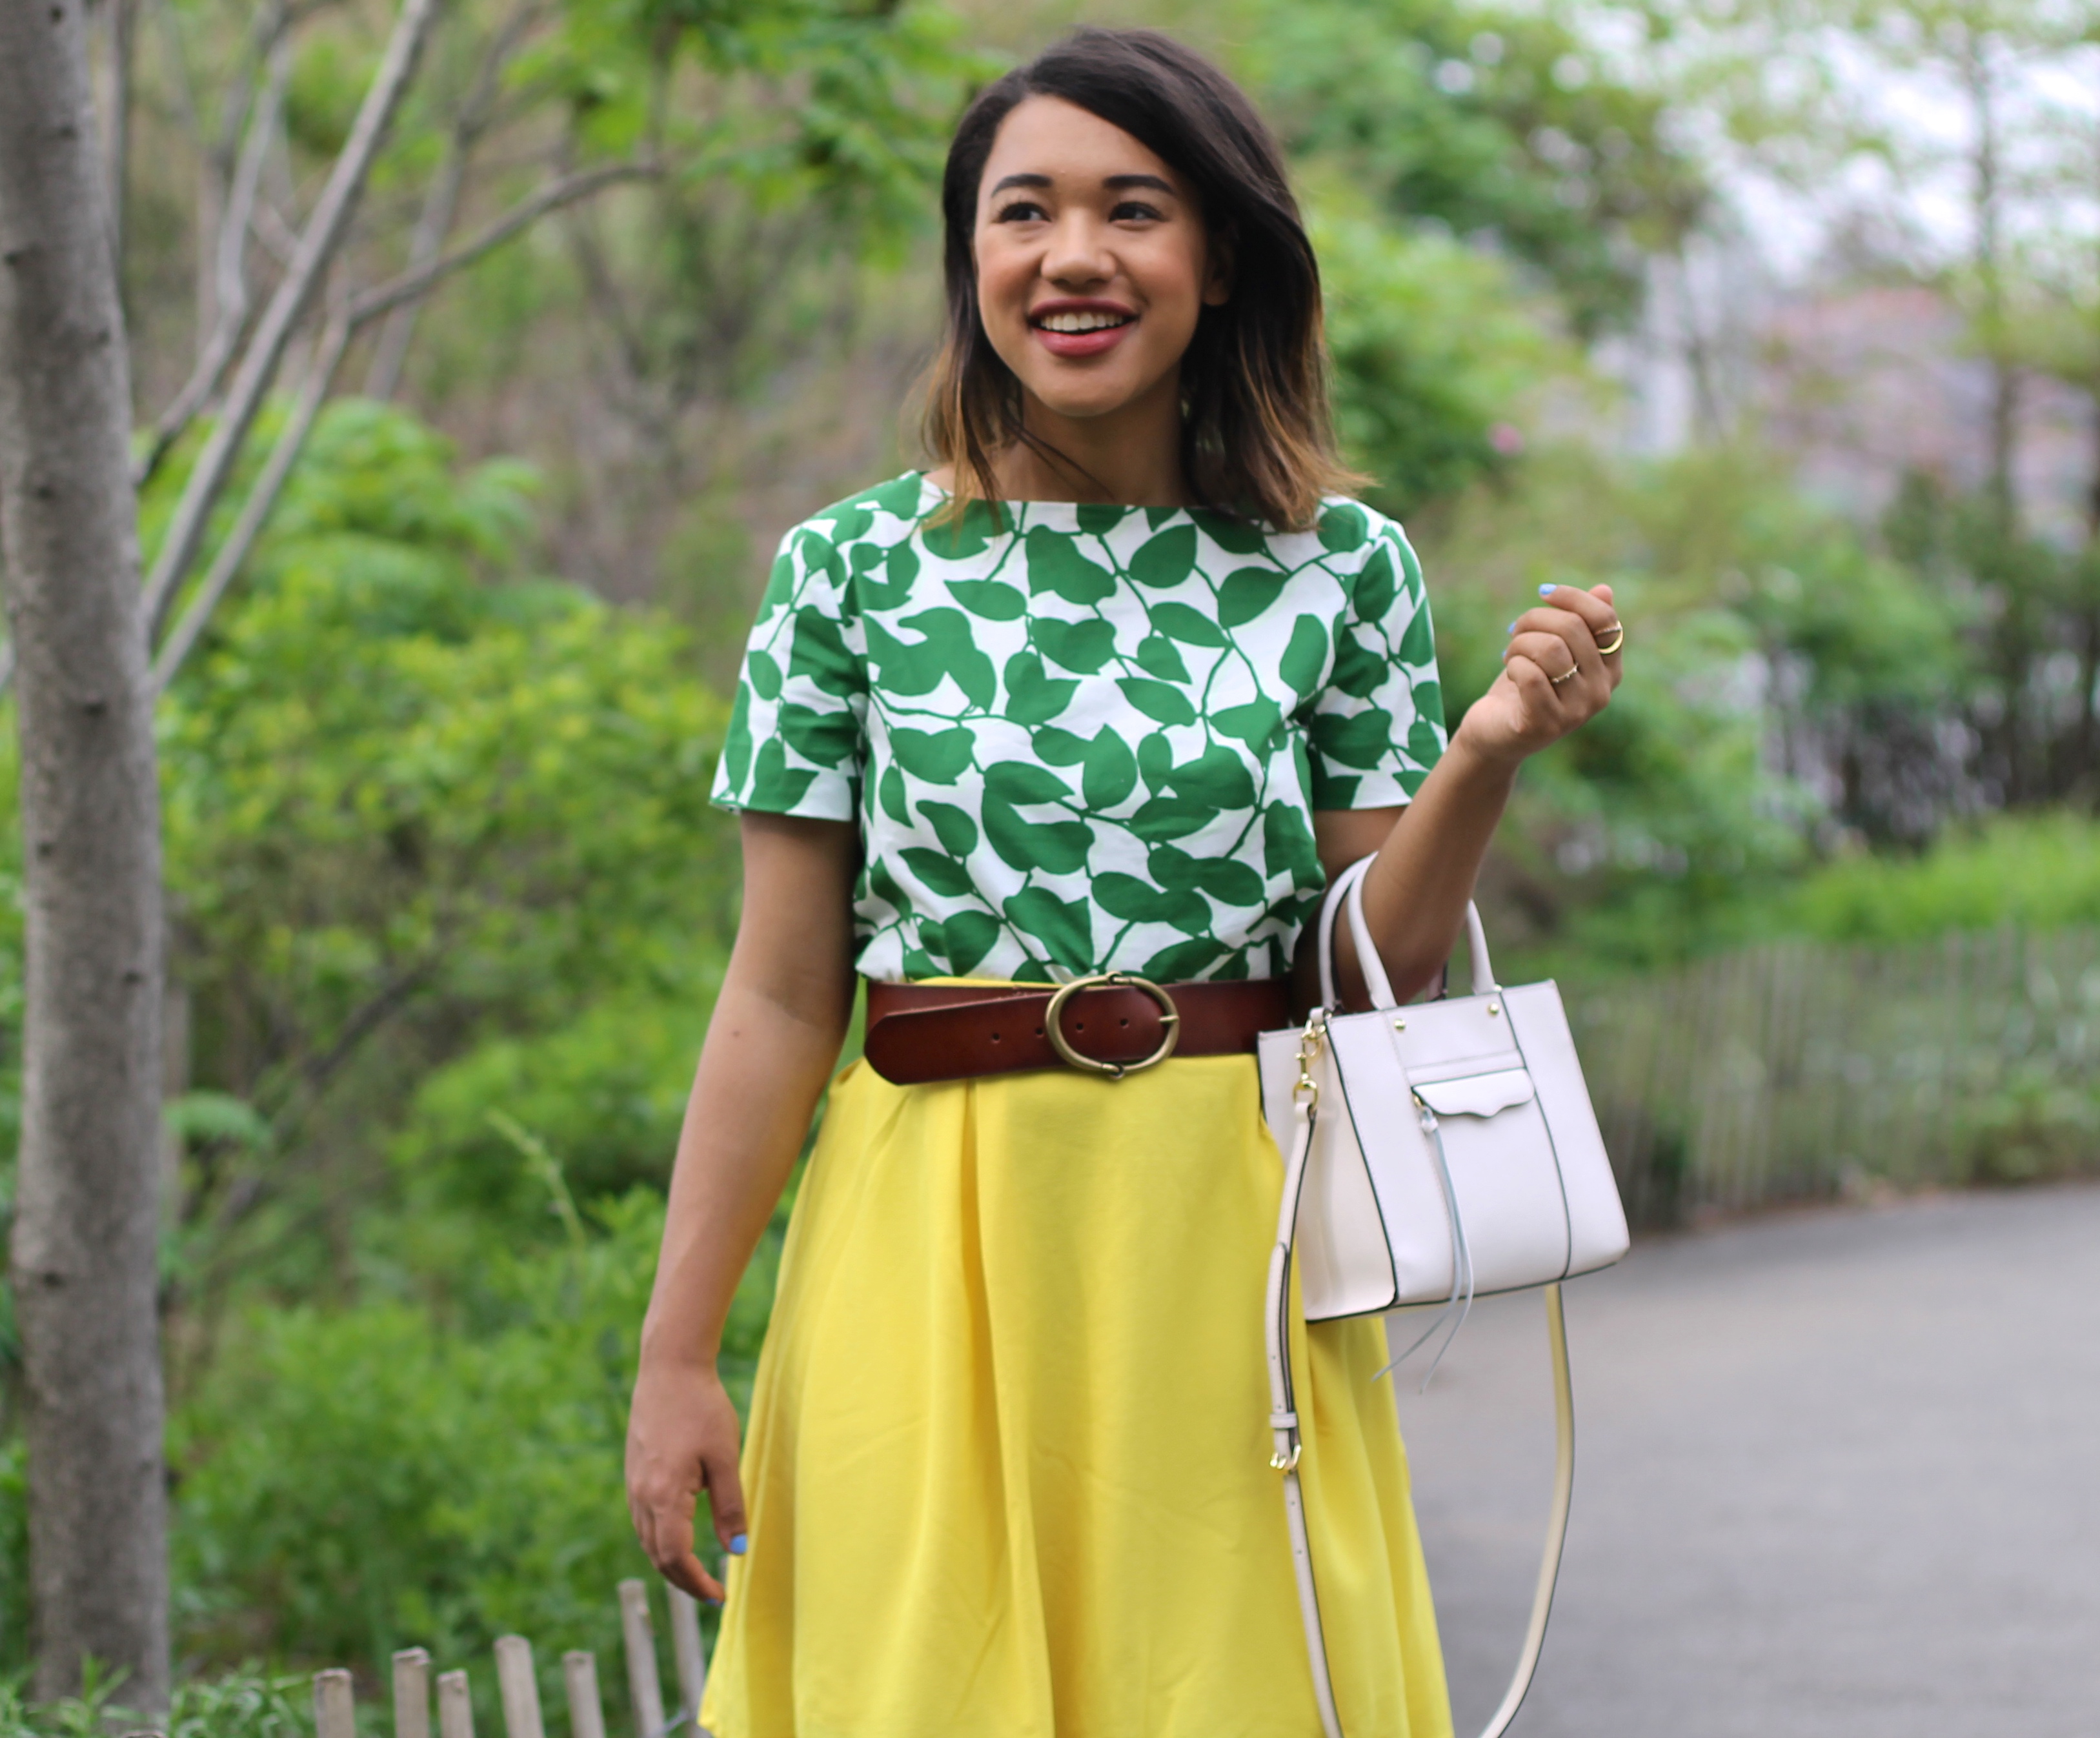 yellow and green green and yellow blair waldorf style look of the day blogger style kate spade blogger kate spade fashion blog kate spade blog kate spade crop top yellow skirt yellow crop top summer style spring style new york style fashion bloggers to follow fashion blogger new york new york fashion blogger